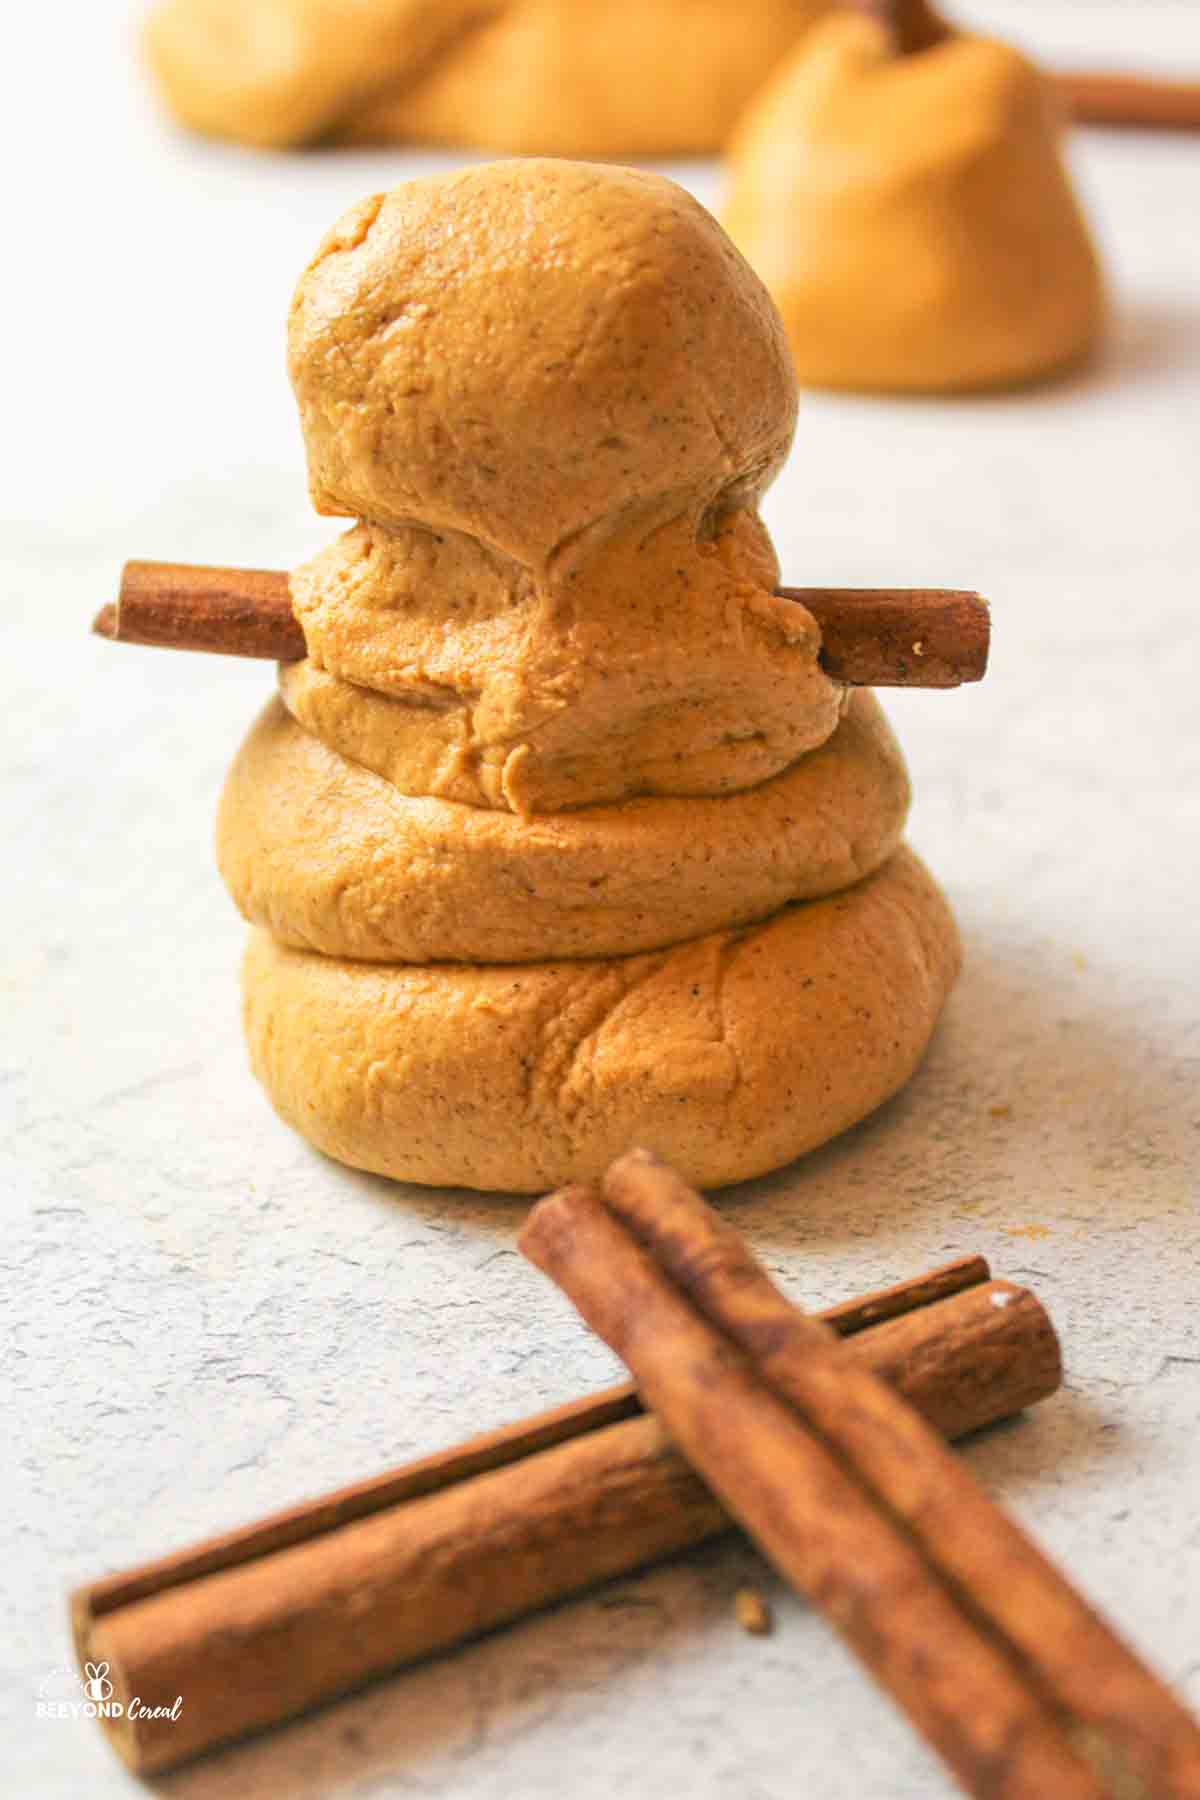 a small snowman shape made from pumpkin playdough with cinnamon stick arms and cinnamon sticks in front.